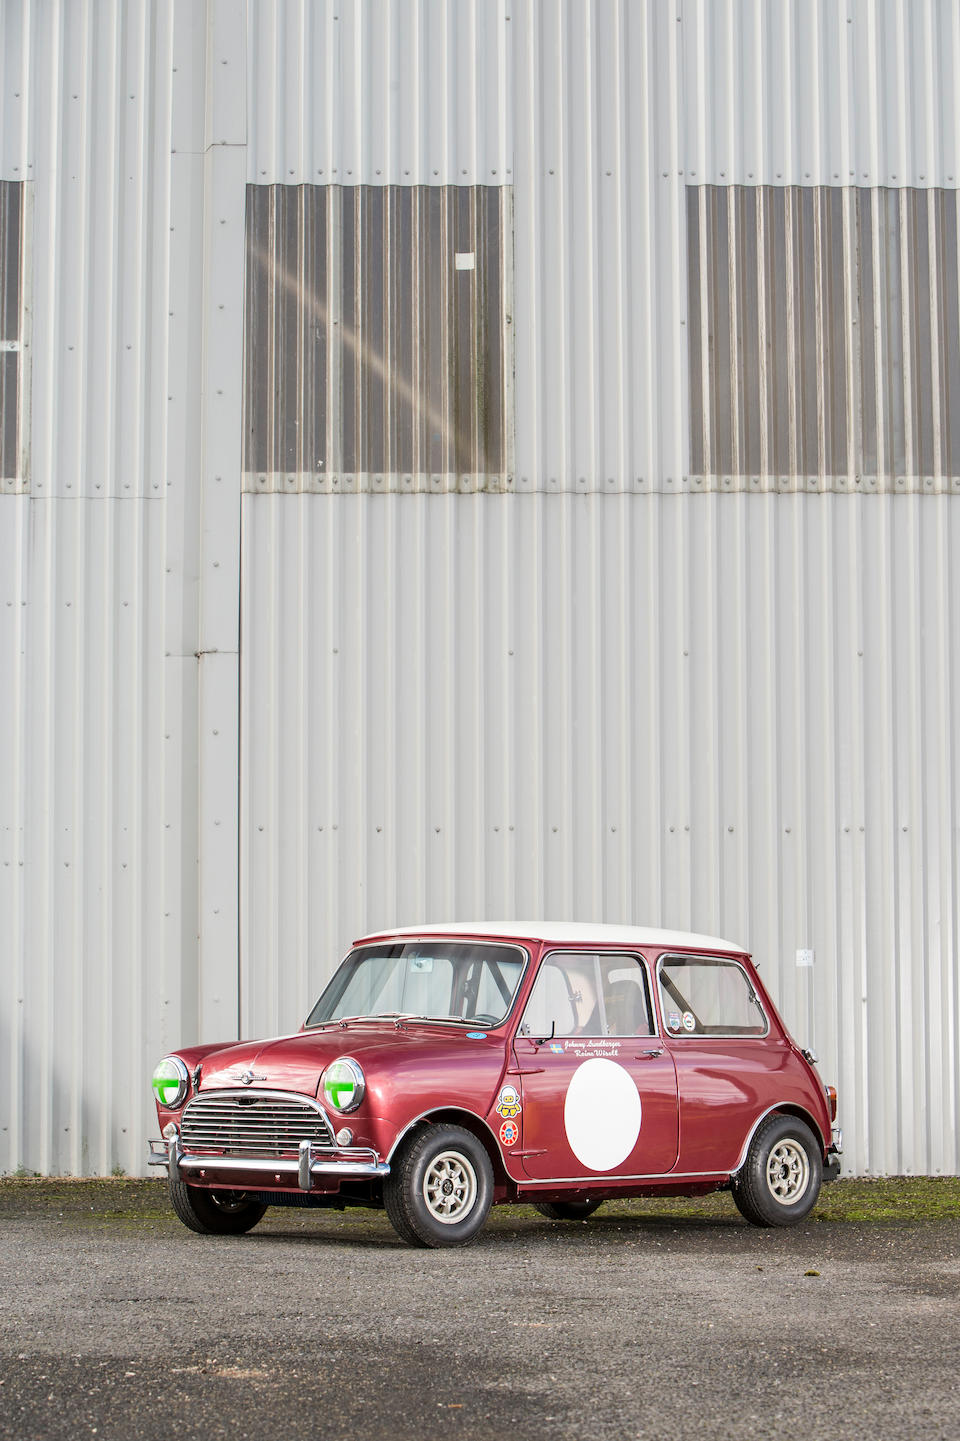 The ex-Johnny Lundberger, Reine Wisell,1964 Morris Mini  Cooper 'S' Competition Saloon  Chassis no. KA2S4-L/553414